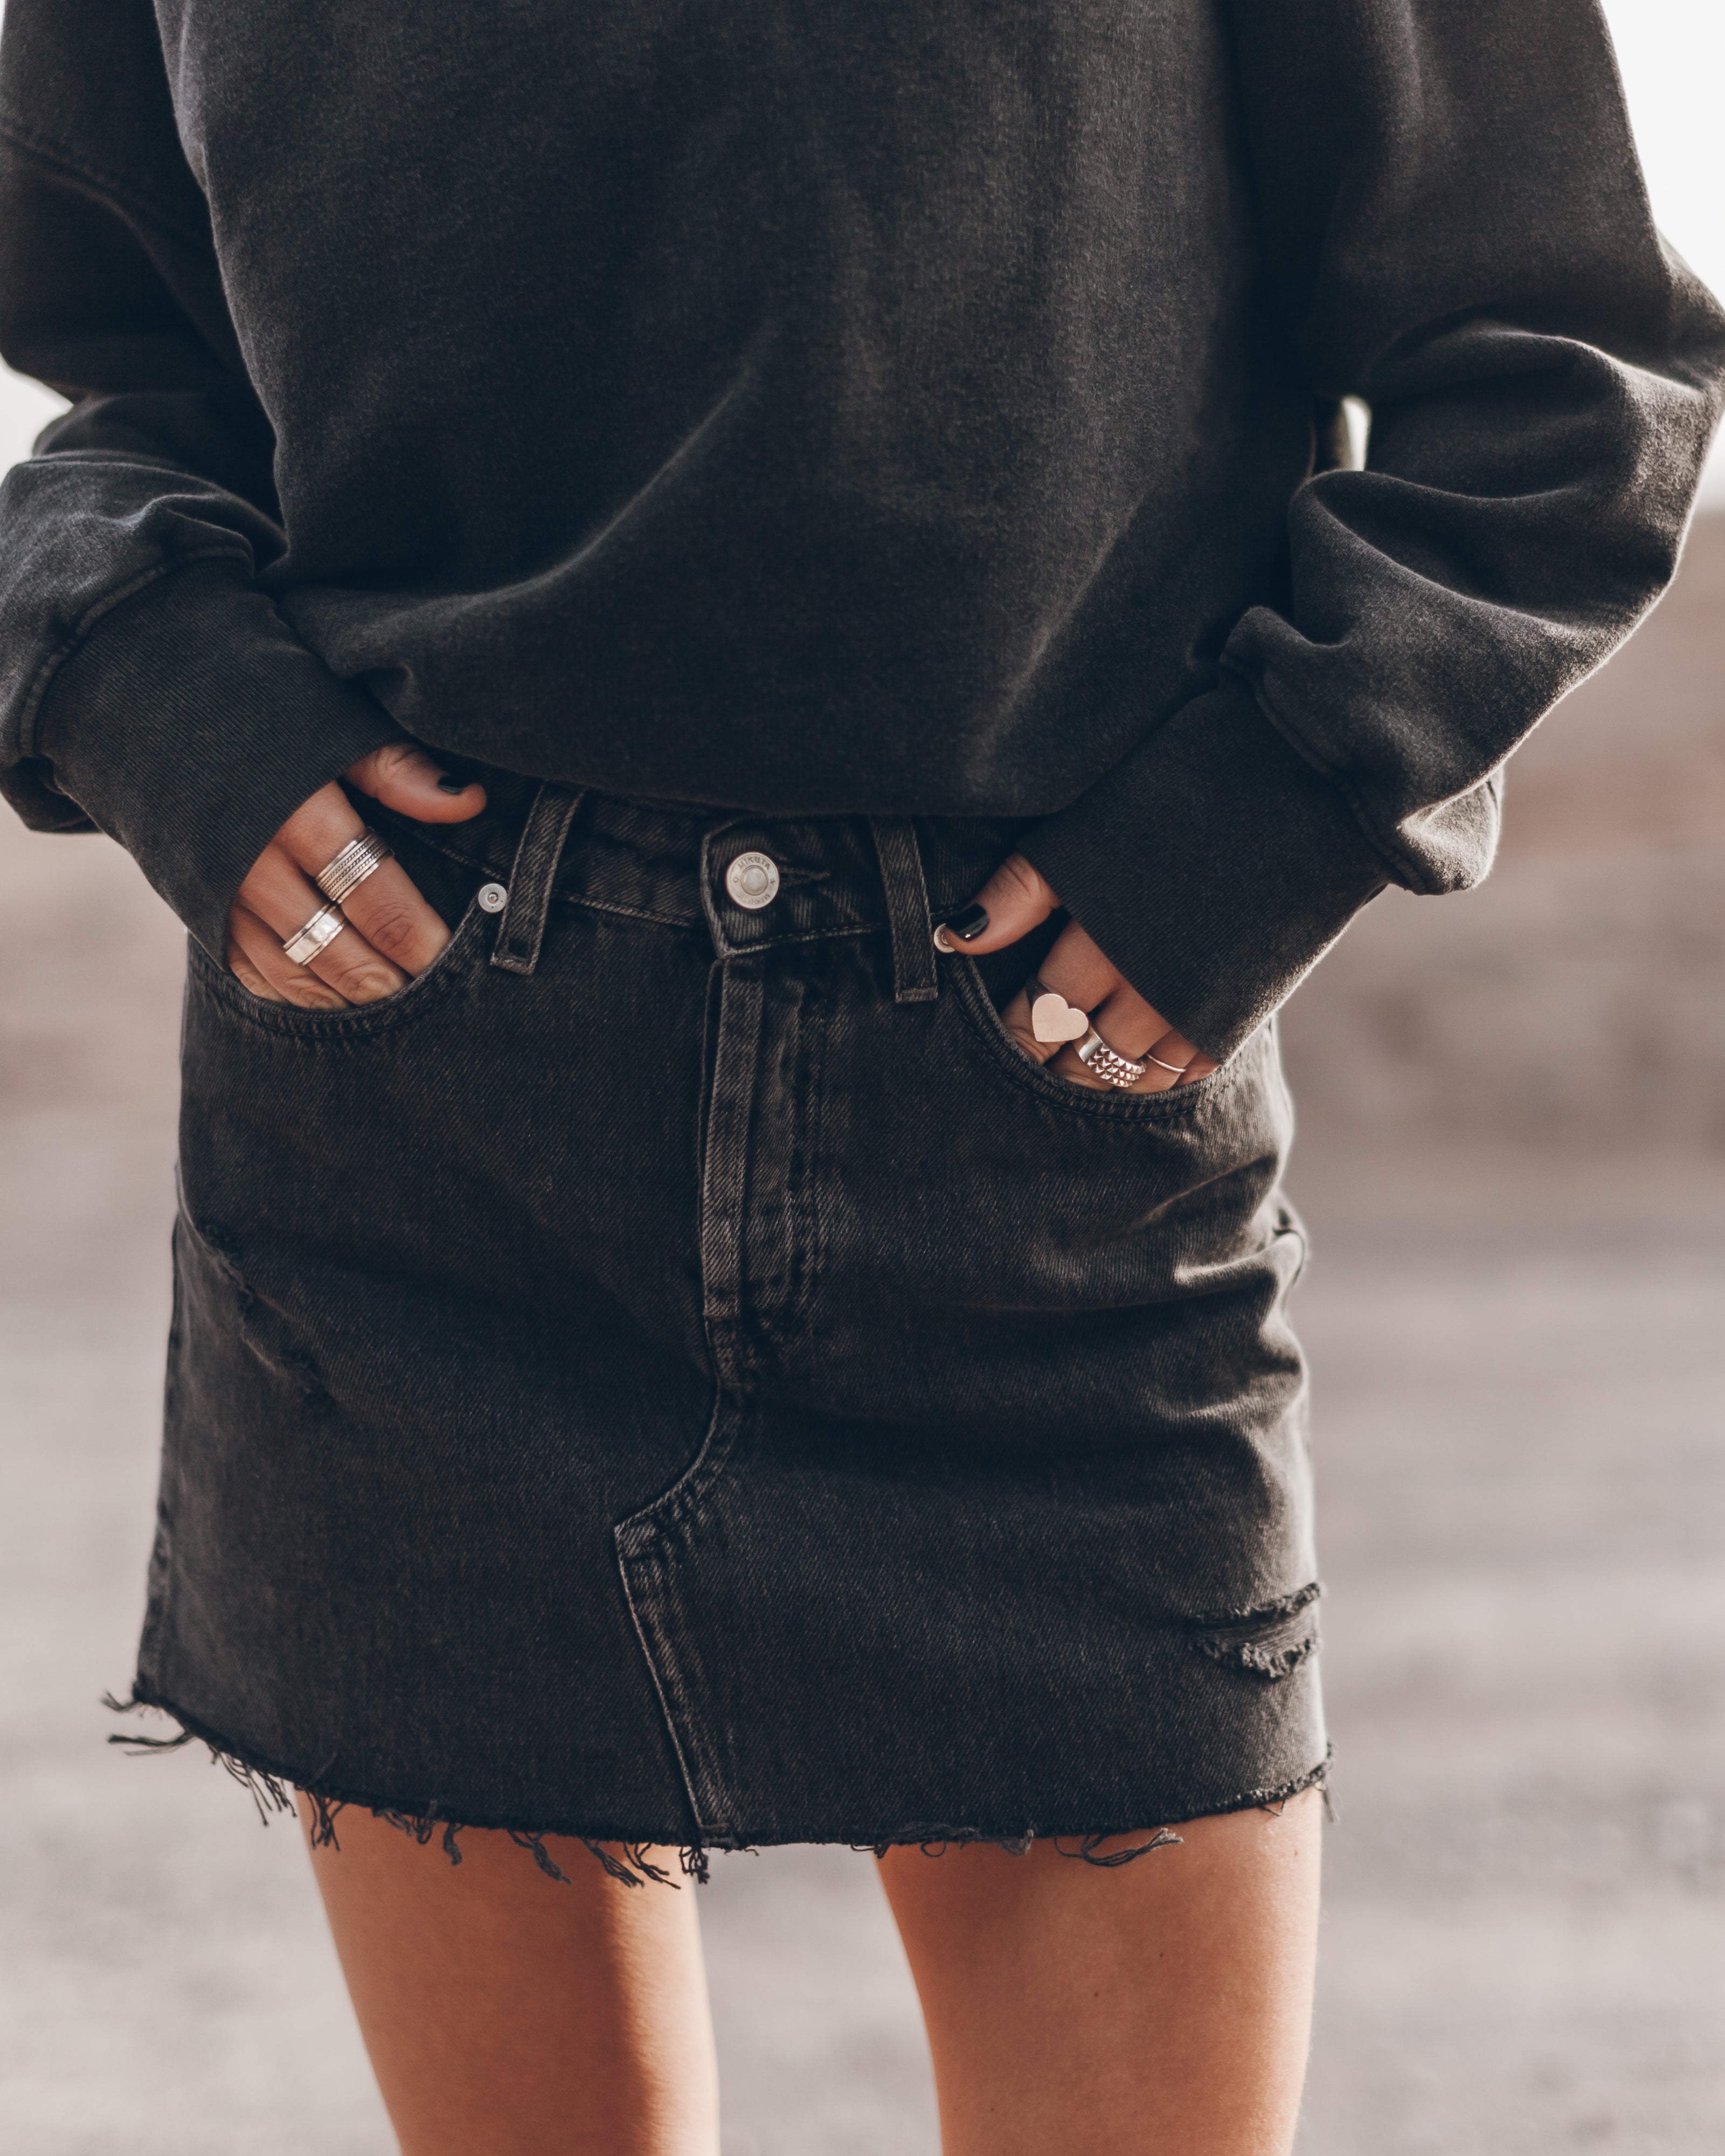 20 Top-Rated Black Denim Skirt Outfit for School | Black denim skirt  outfit, Black women fashion, Black denim outfit